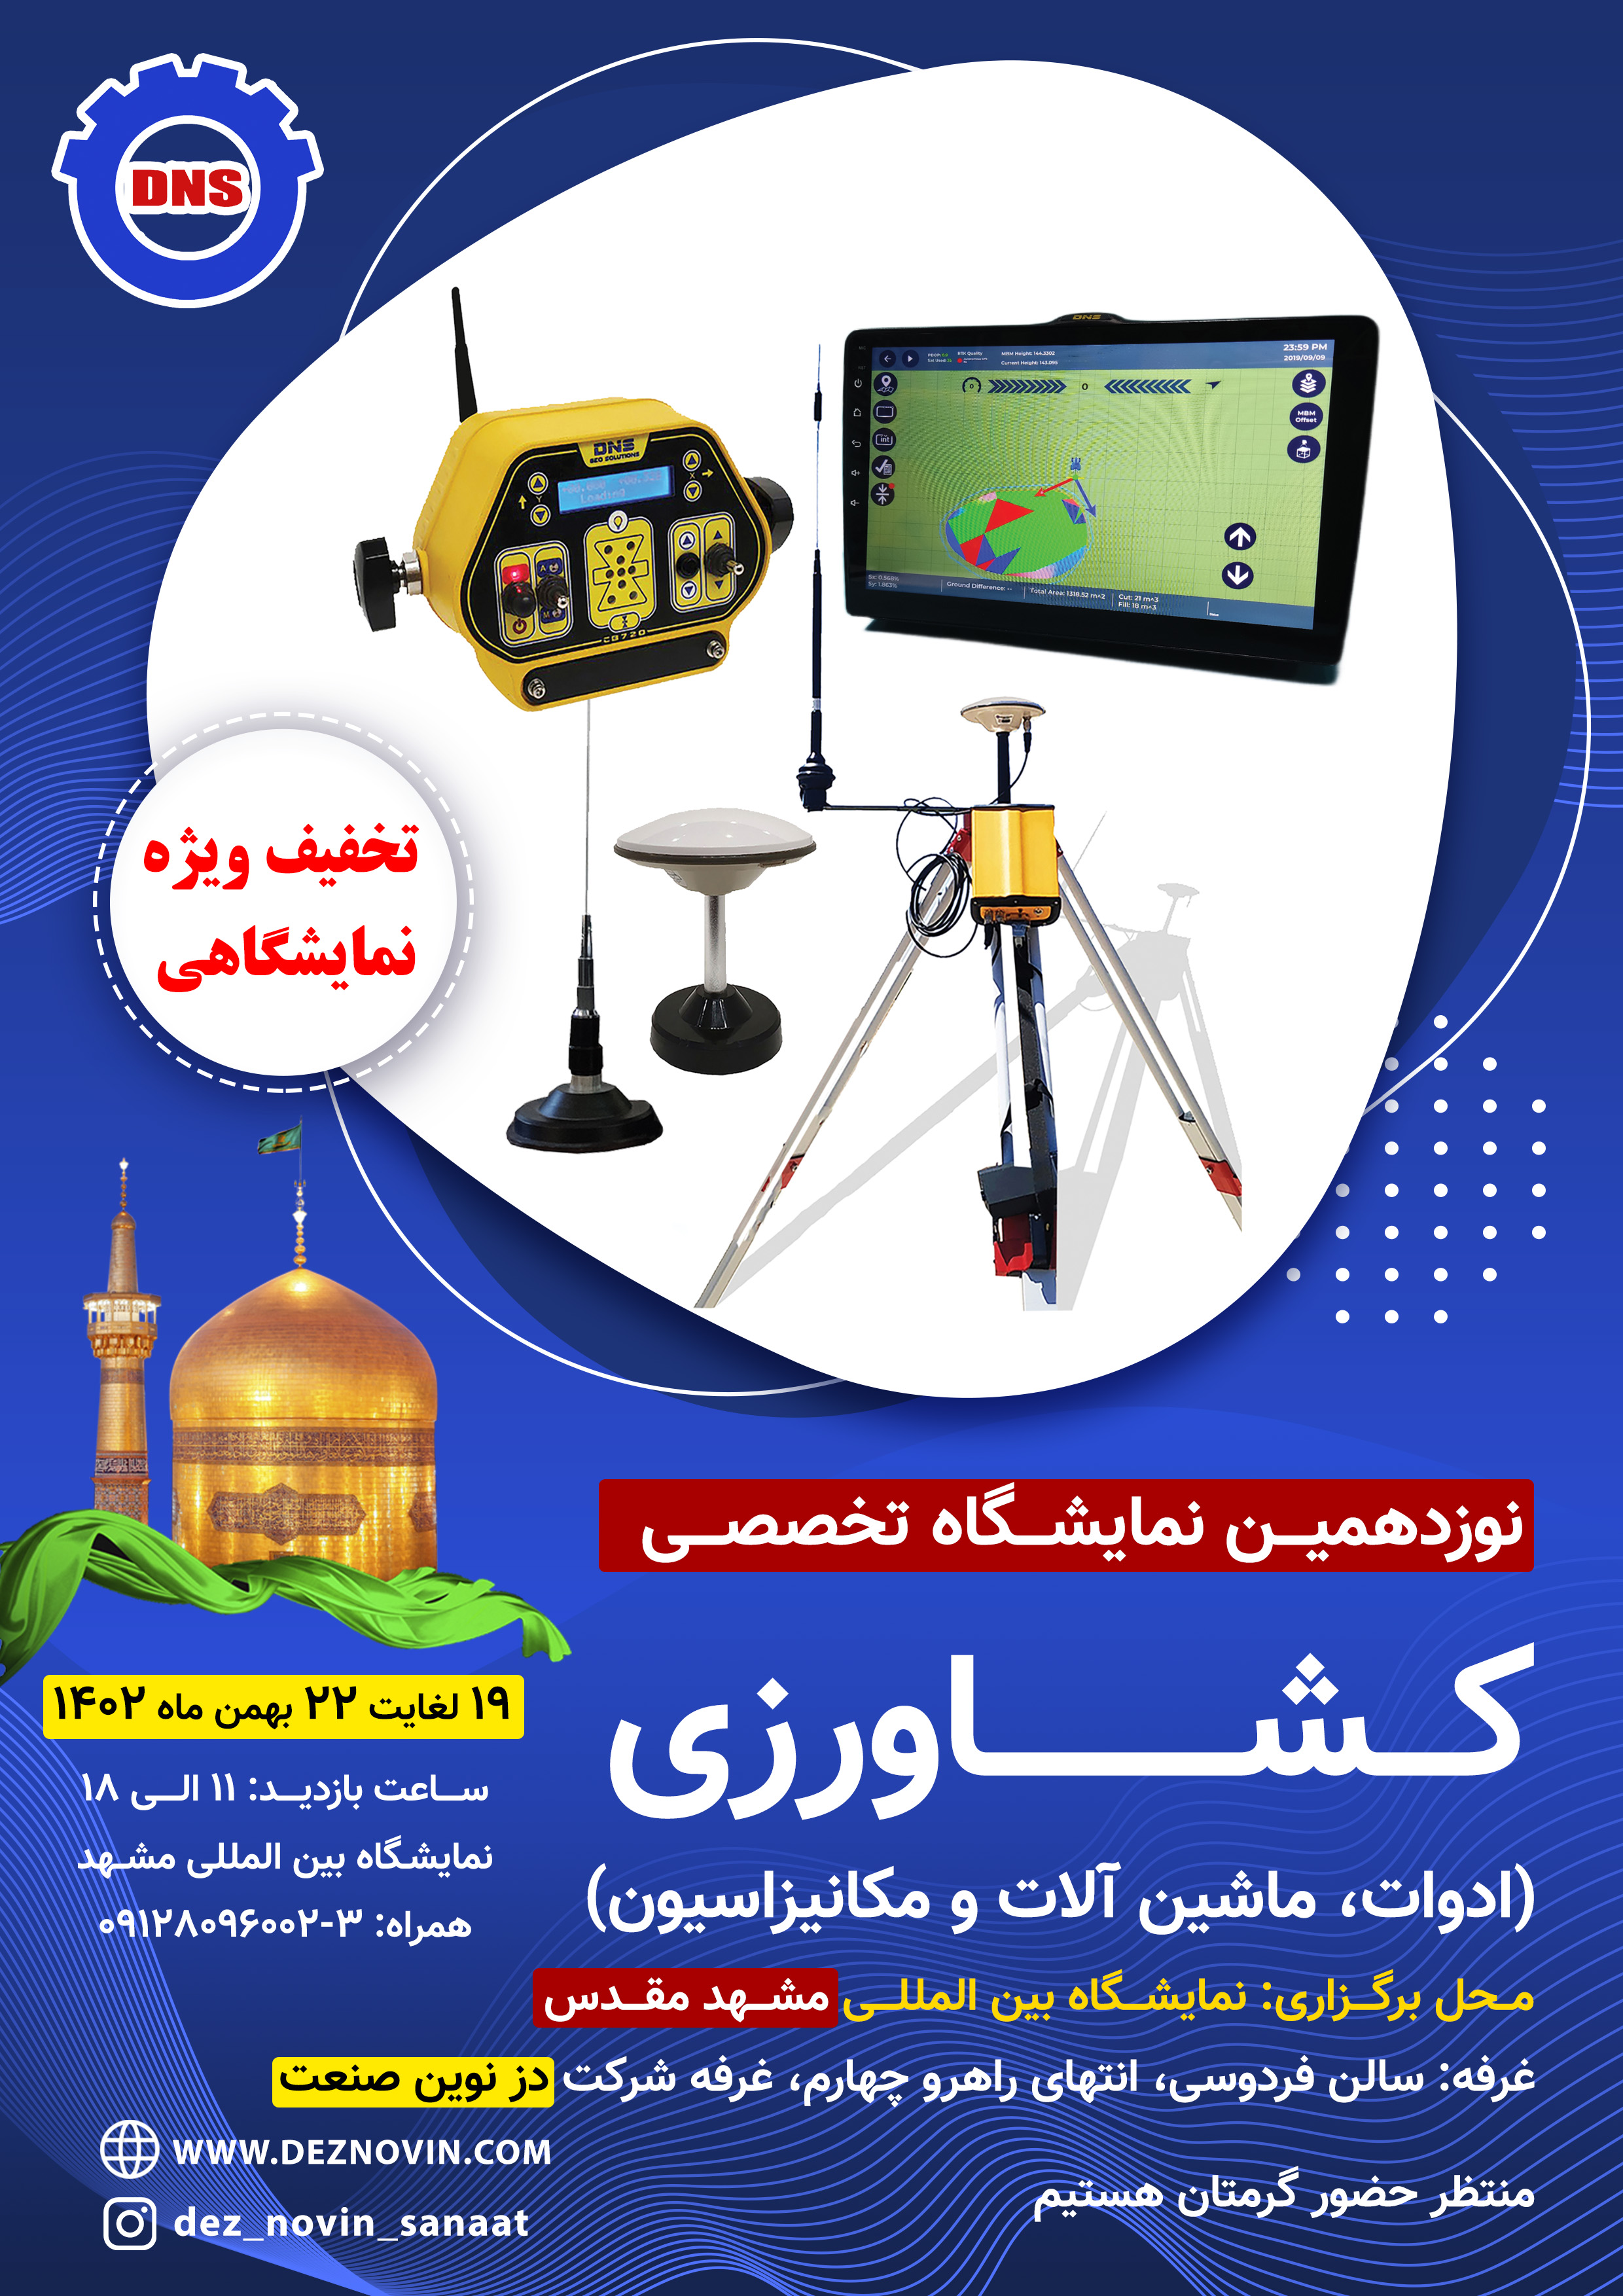 Poster of the 19th international specialized agricultural exhibition (tools, machines, mechanization) from 19 to 22 Bahman 1402 